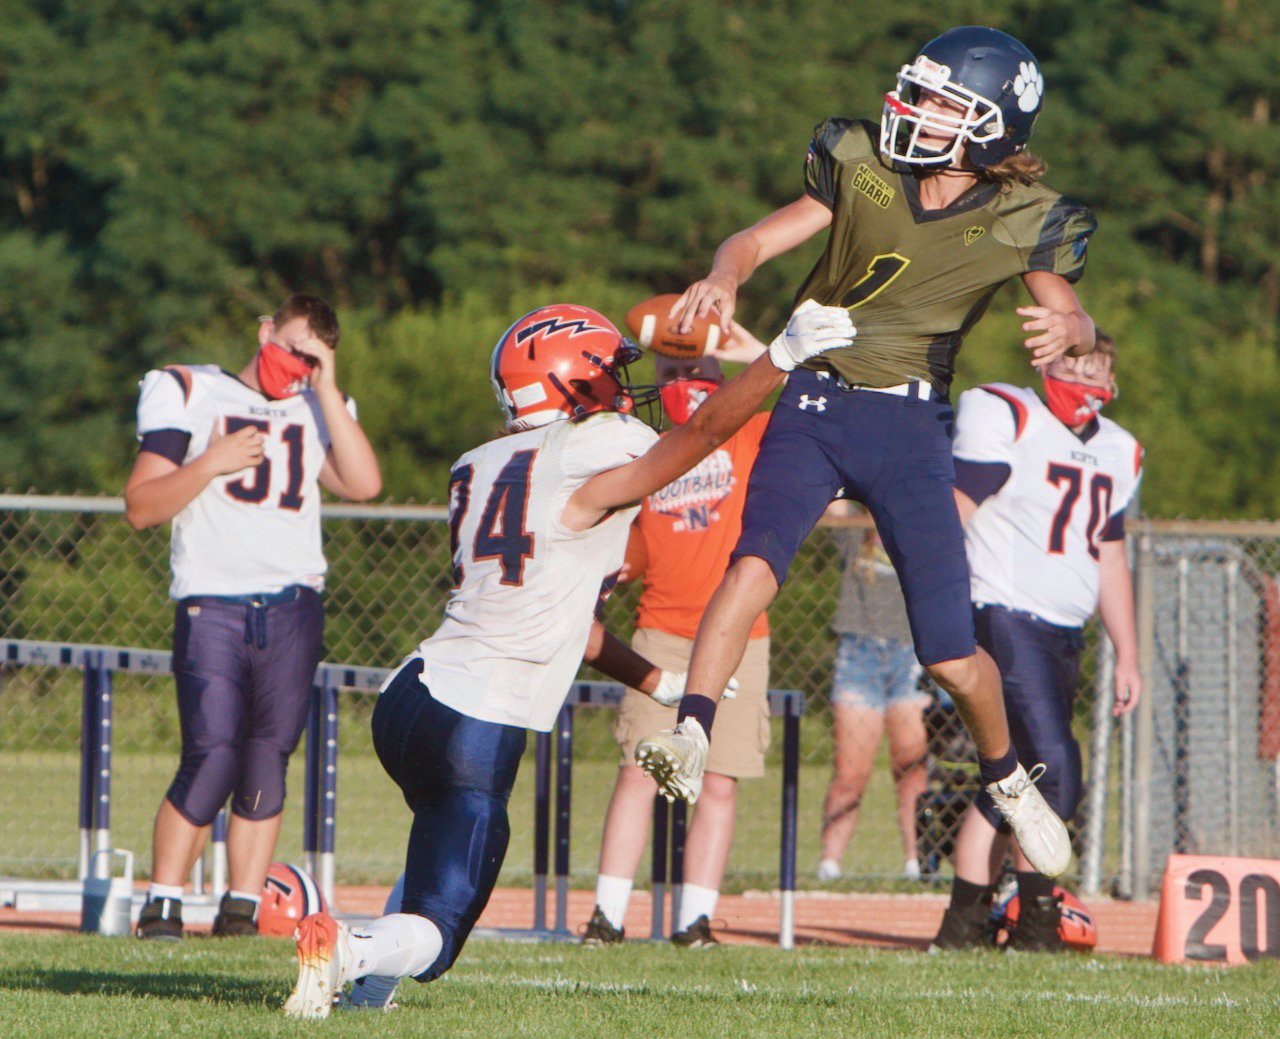 North Montgomery's Kolton Scrimager makes a one-handed grab to stop the opposing QB.